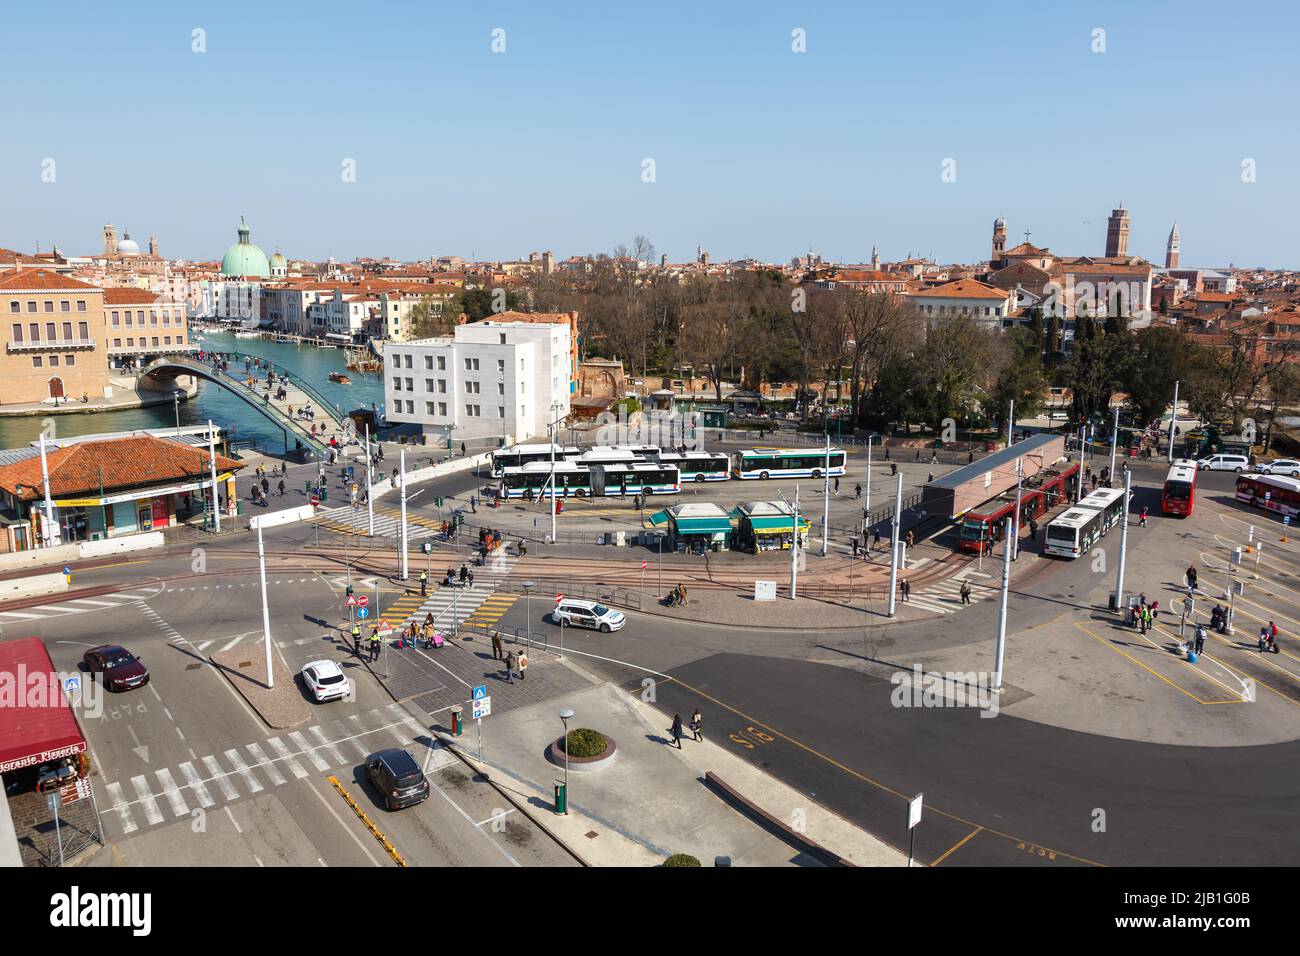 Venice, Italy - March 20, 2022: Bus station with rubber-tyred tram at Piazzale Roma public transport in Venice, Italy. Stock Photo